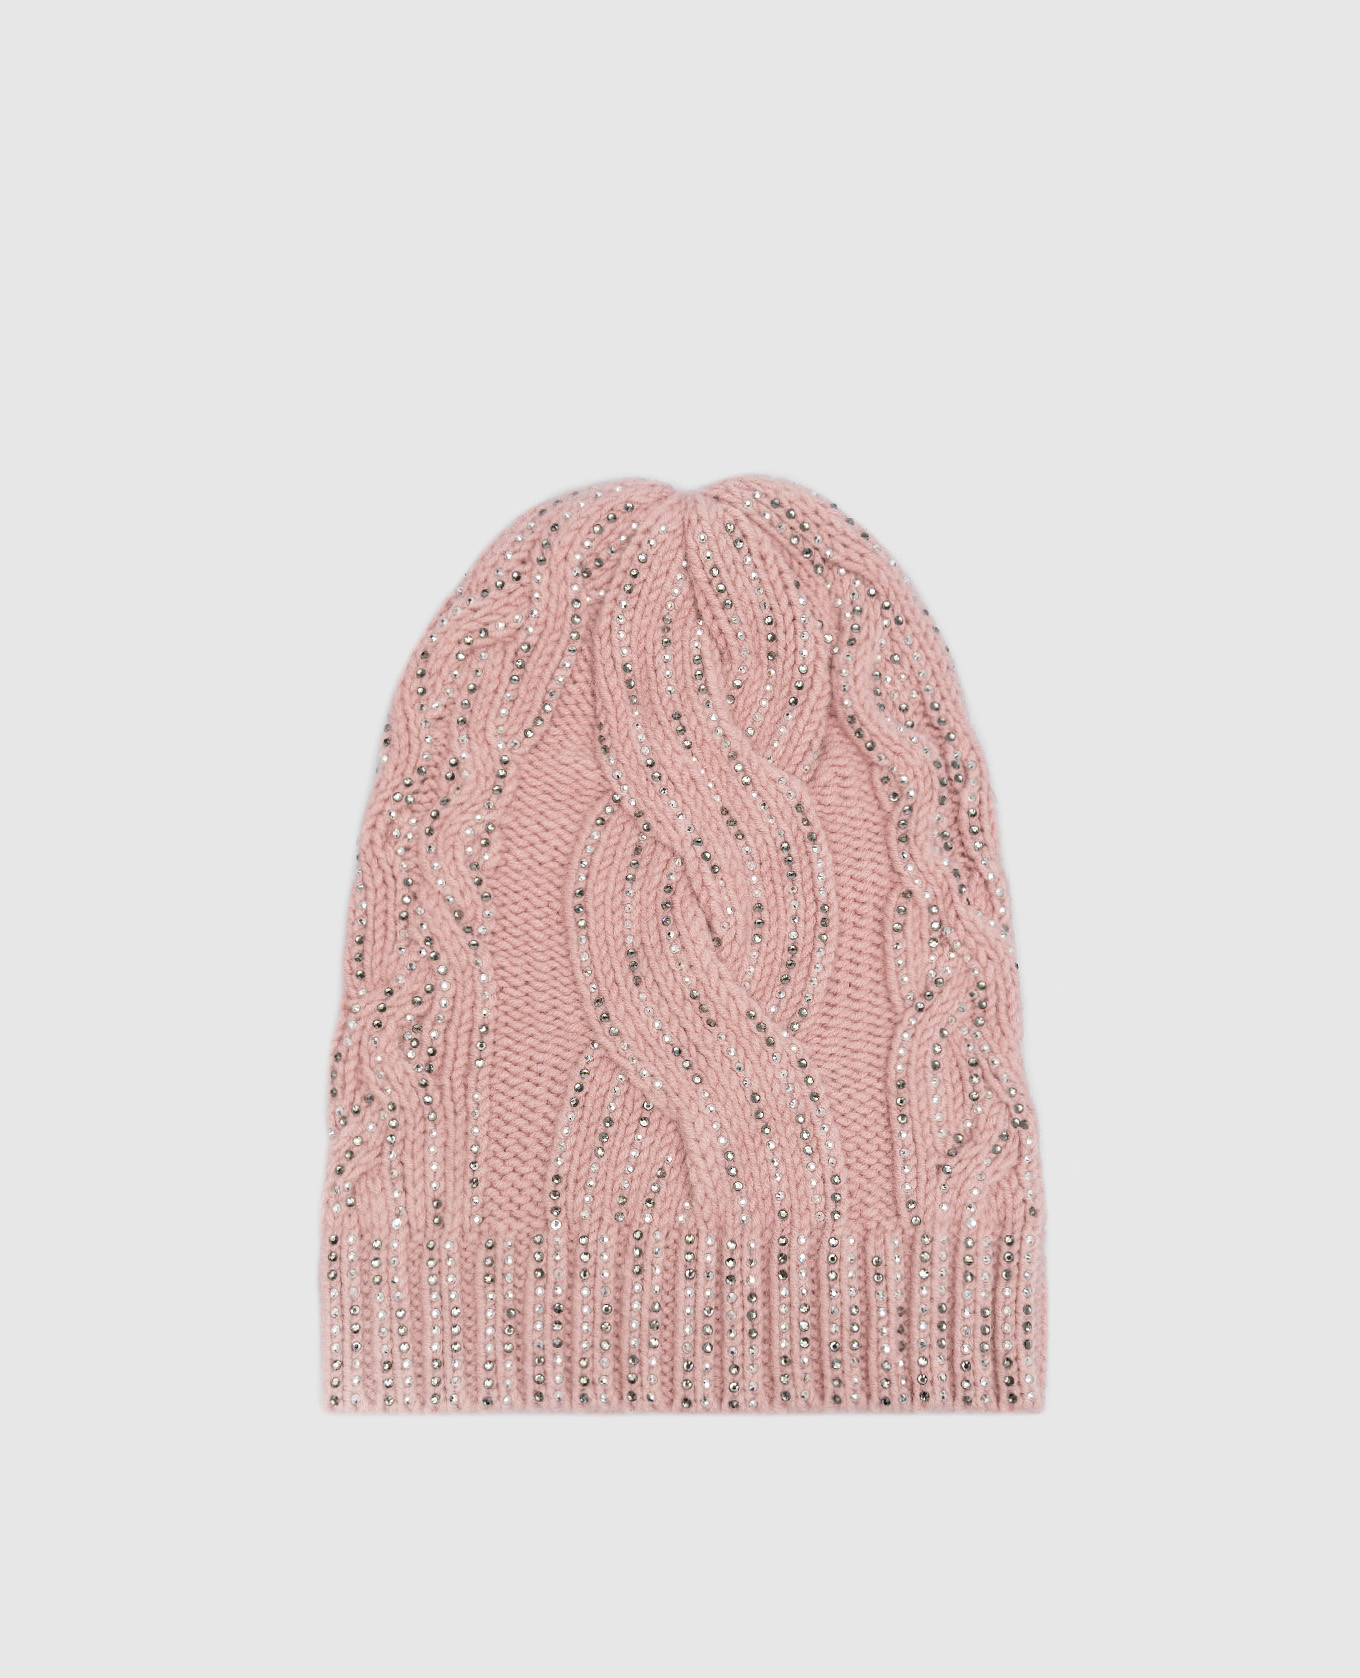 Pink cap with crystals